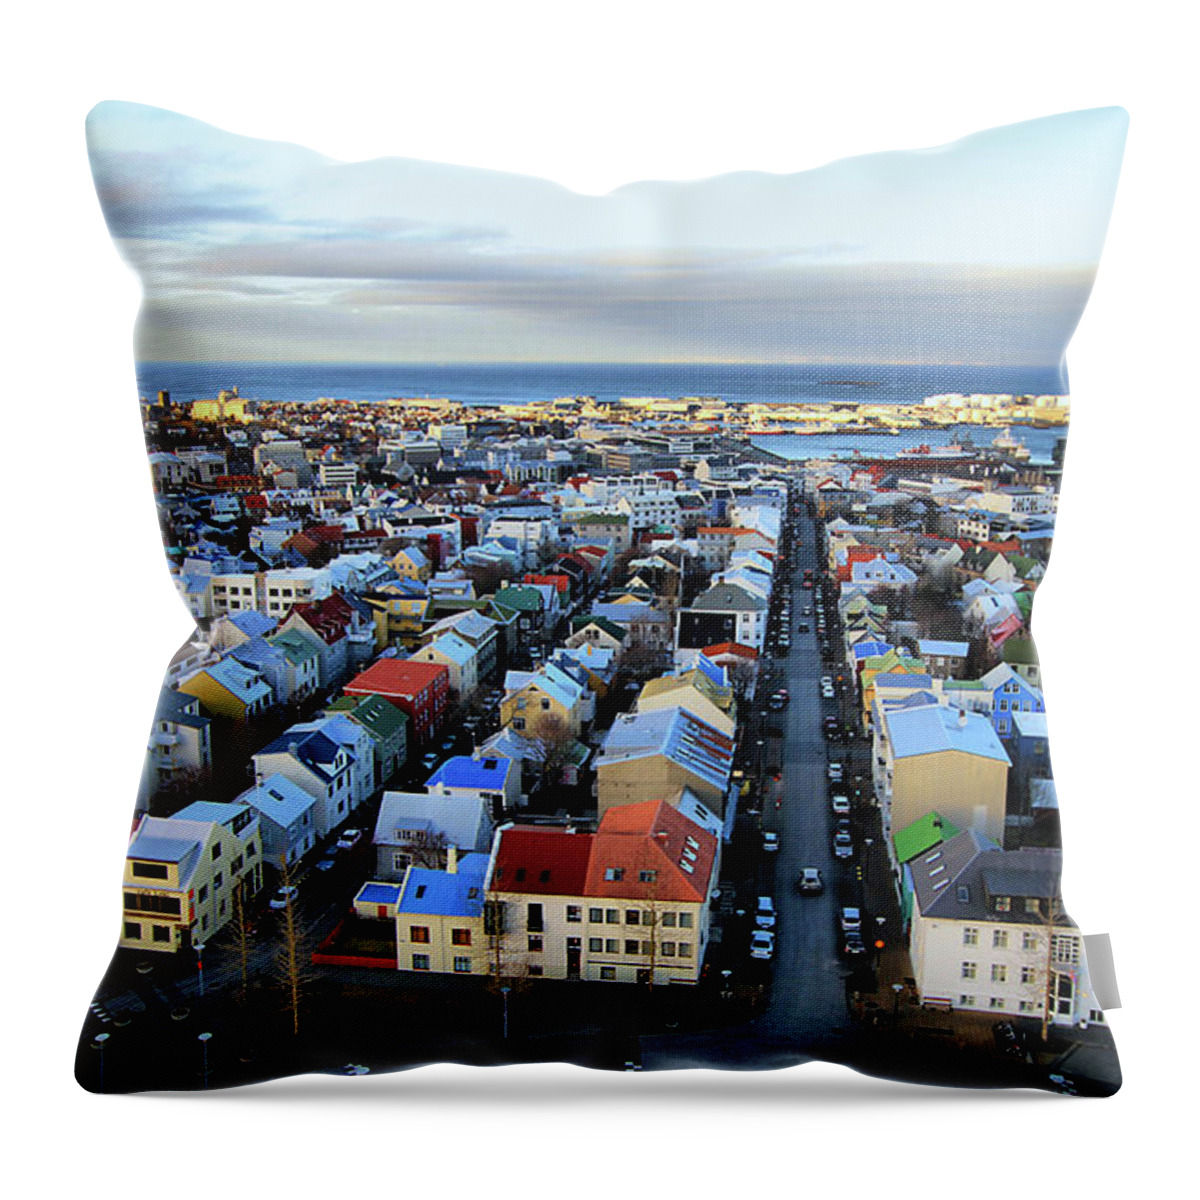 Built Structure Throw Pillow featuring the photograph Colorful Reykjavik, Iceland, Cityscape by L. Toshio Kishiyama